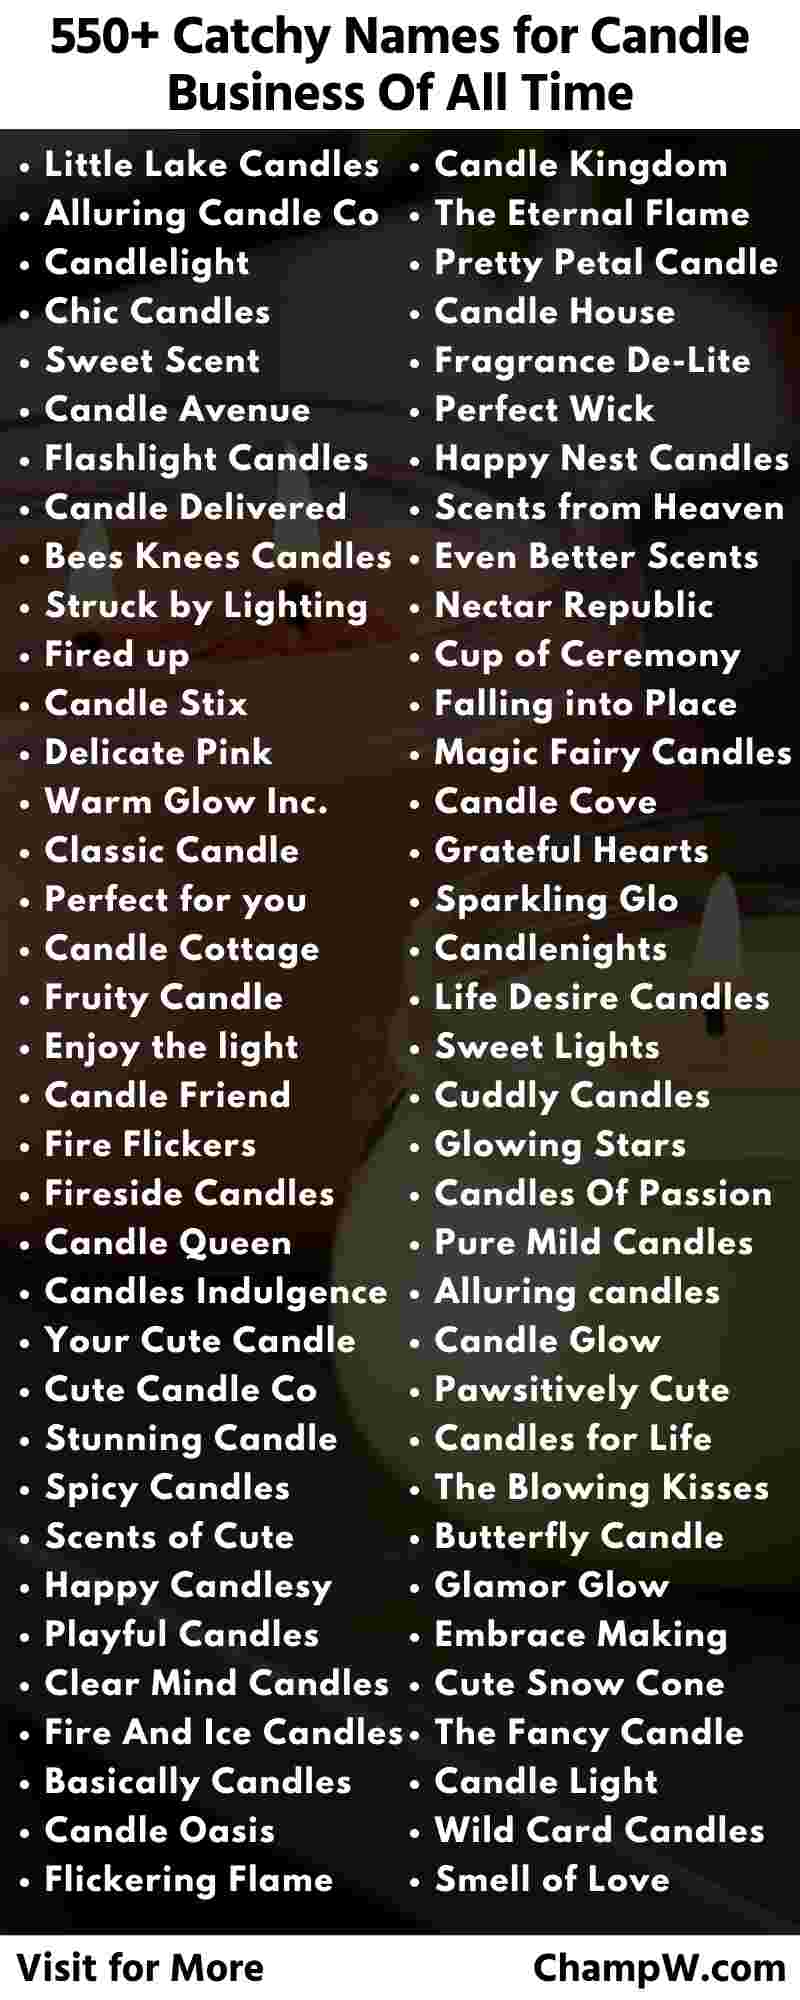 Candle Business names infographic